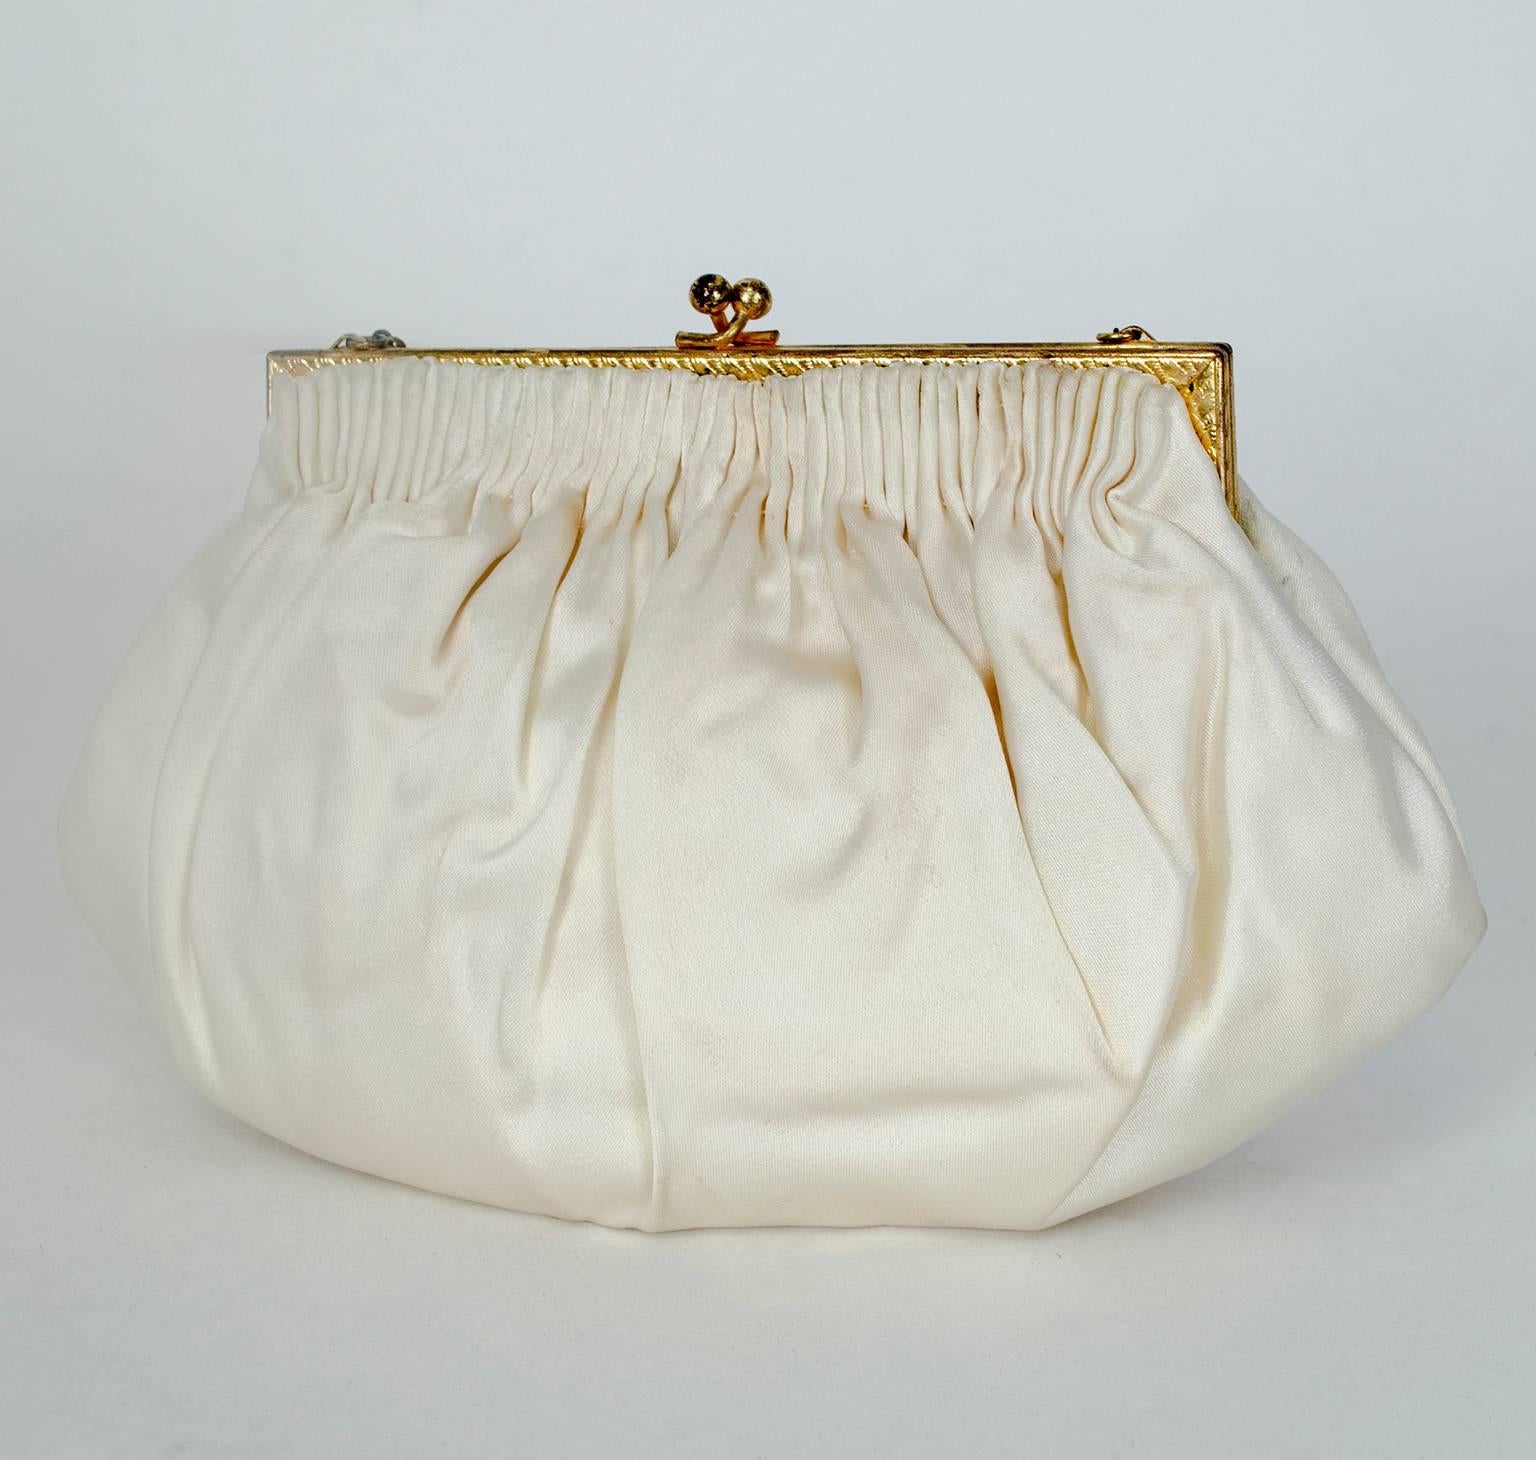 Open into the 2010s, Denise Francelle was a regular Paris stop for Fashion Week attendees as well as icons like Grace Kelly and Rita Hayworth. In keeping with the store’s focus on luxury accessories, this one-of-a-kind evening bag features French